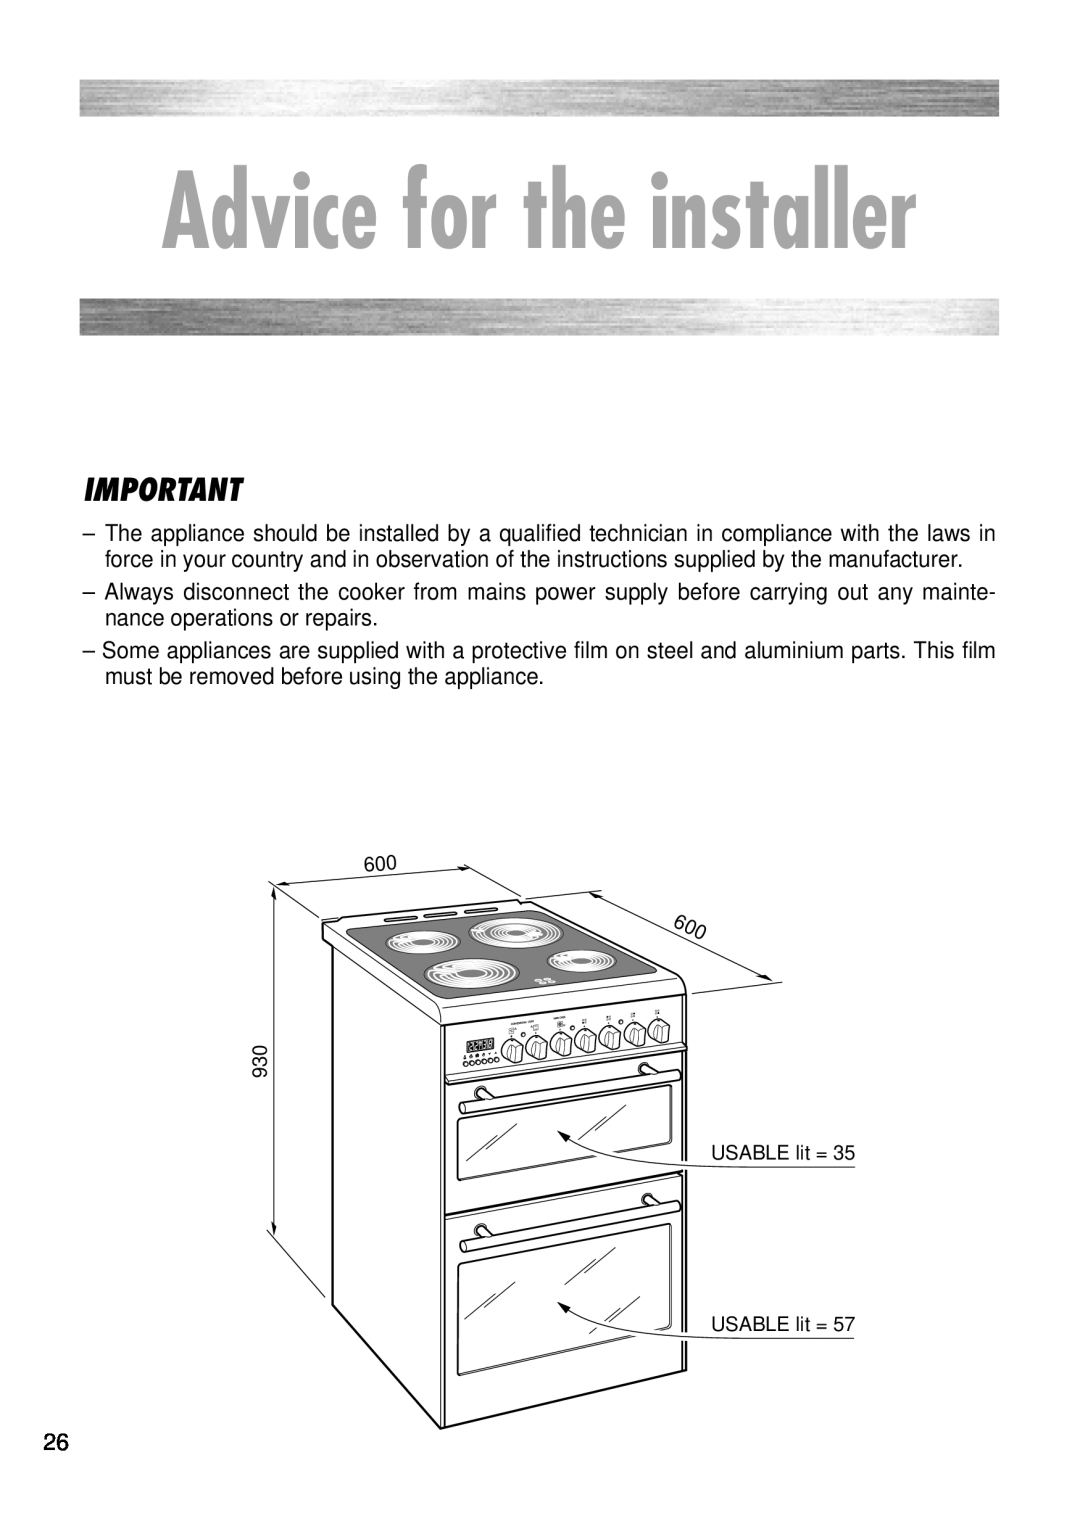 Kenwood CK 280 manual Advice for the installer 